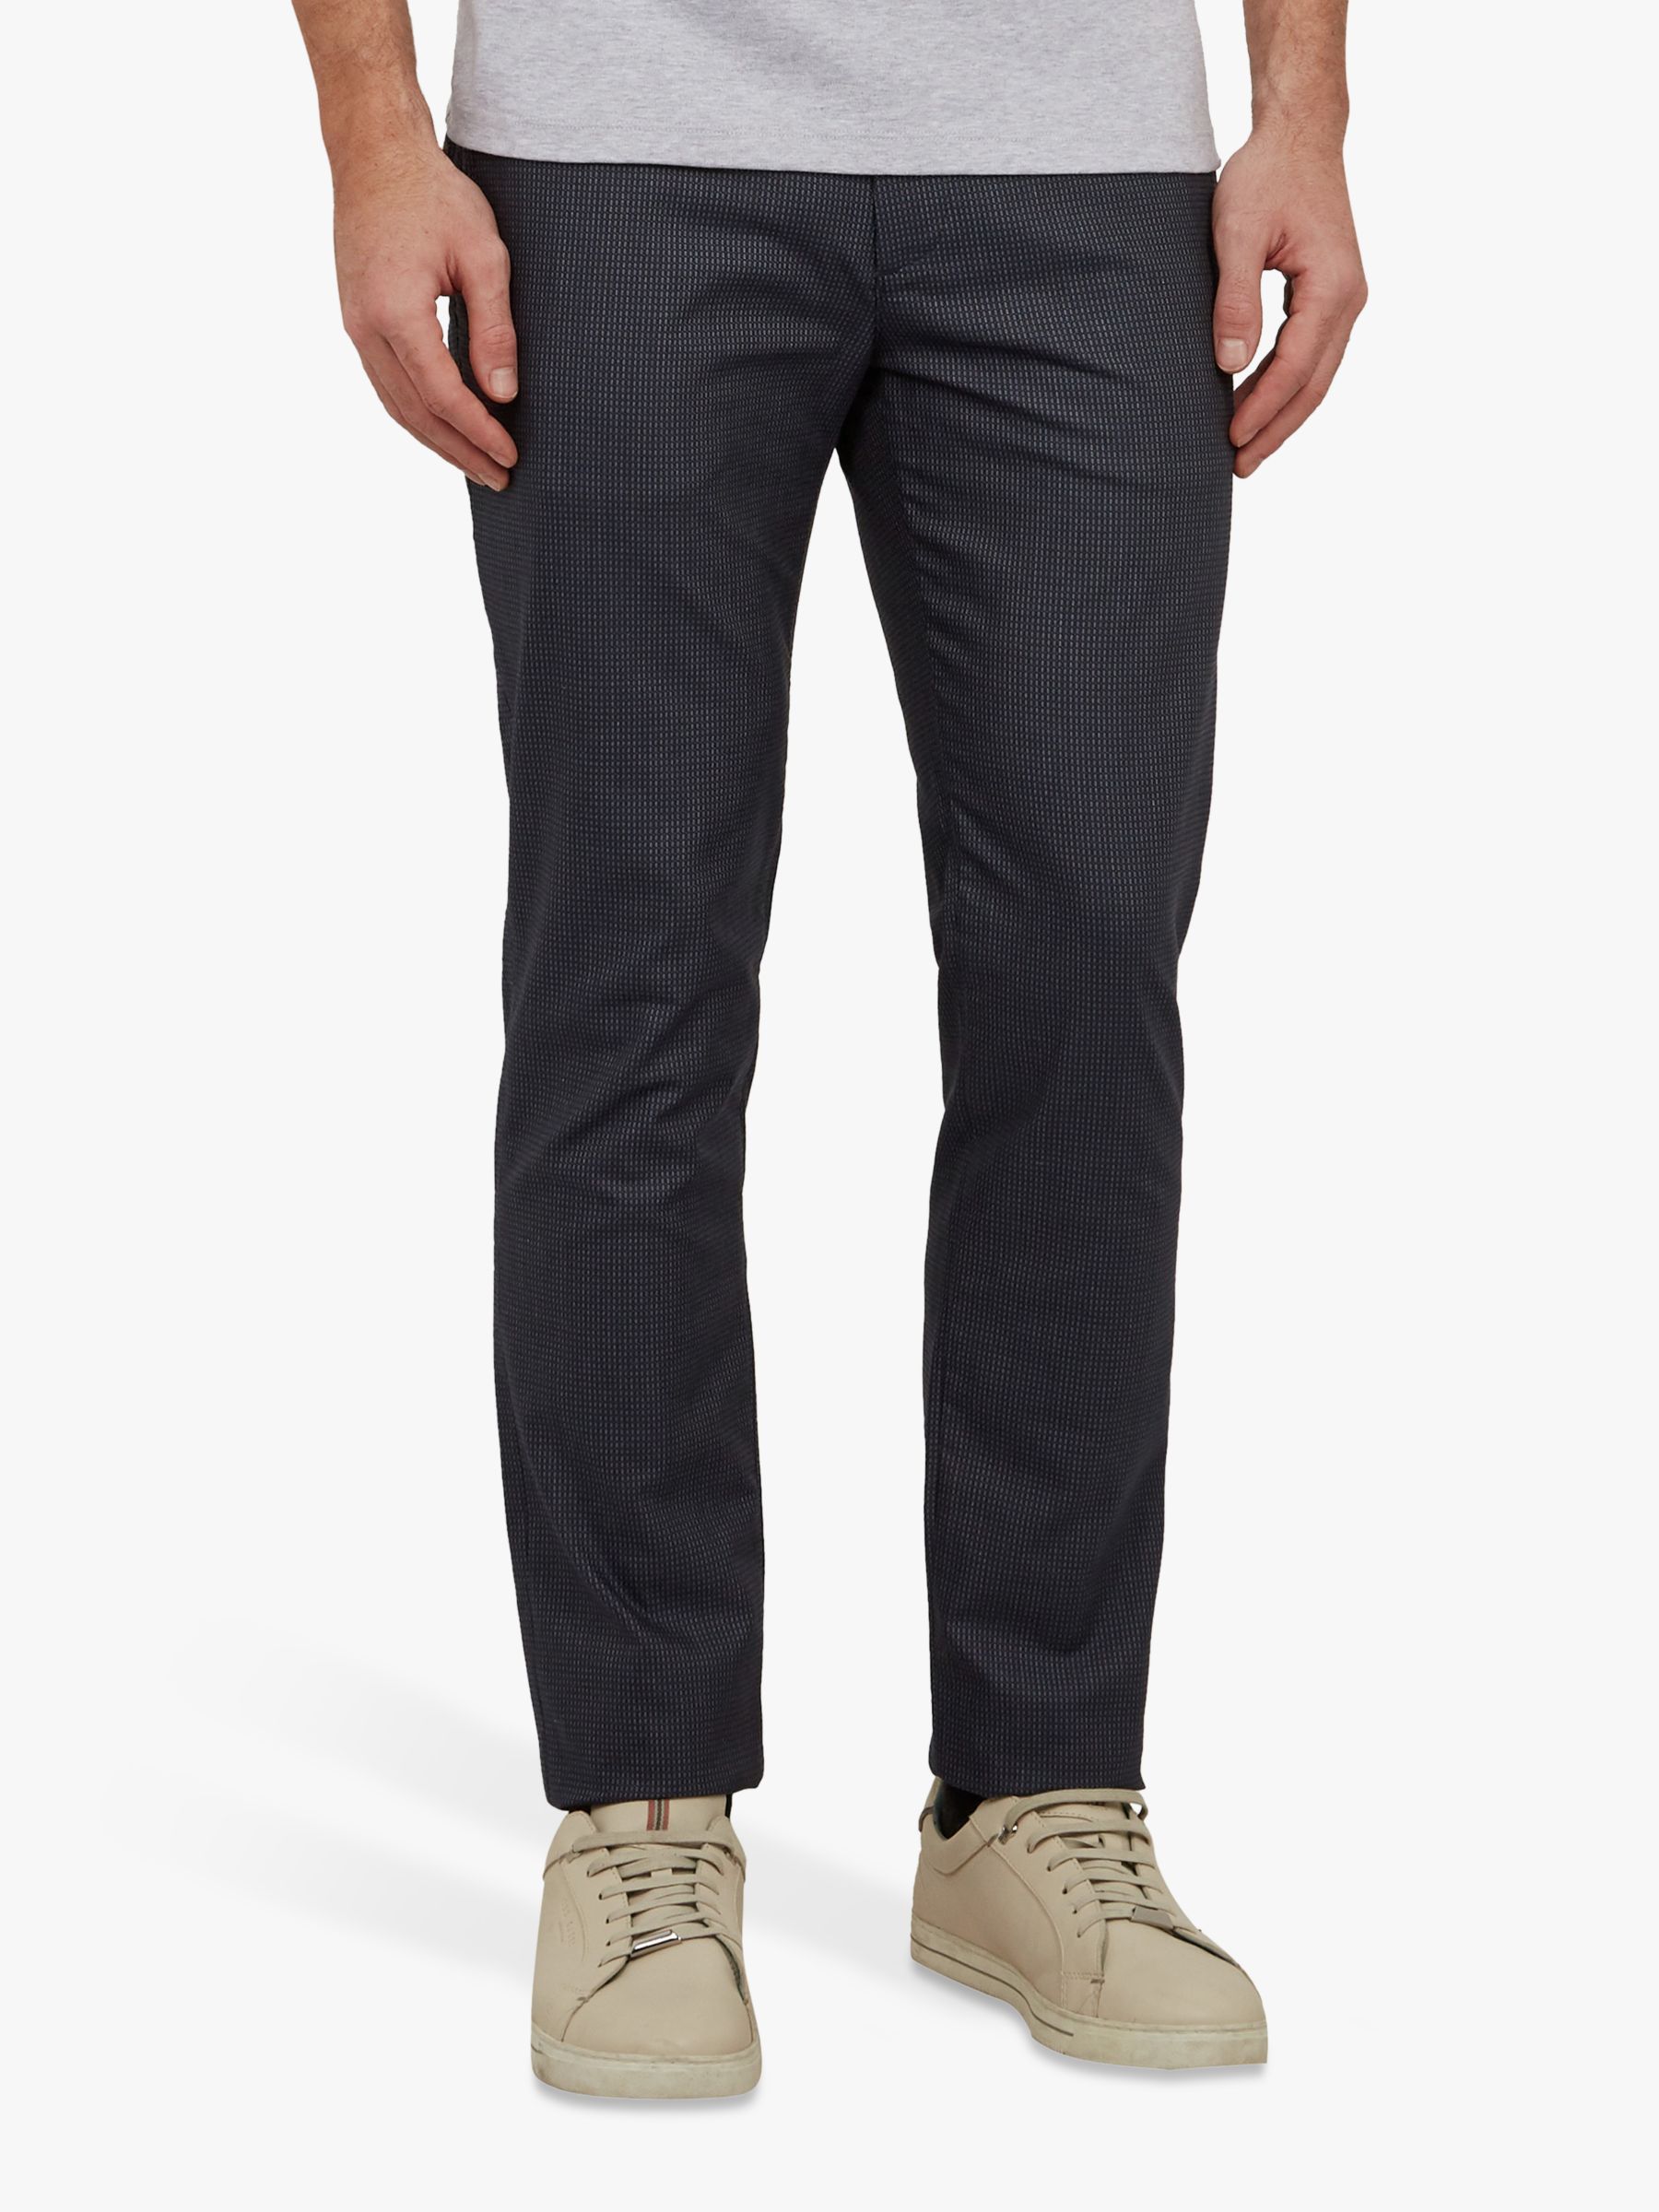 Ted Baker Stelim Slim Fit Textured Trousers